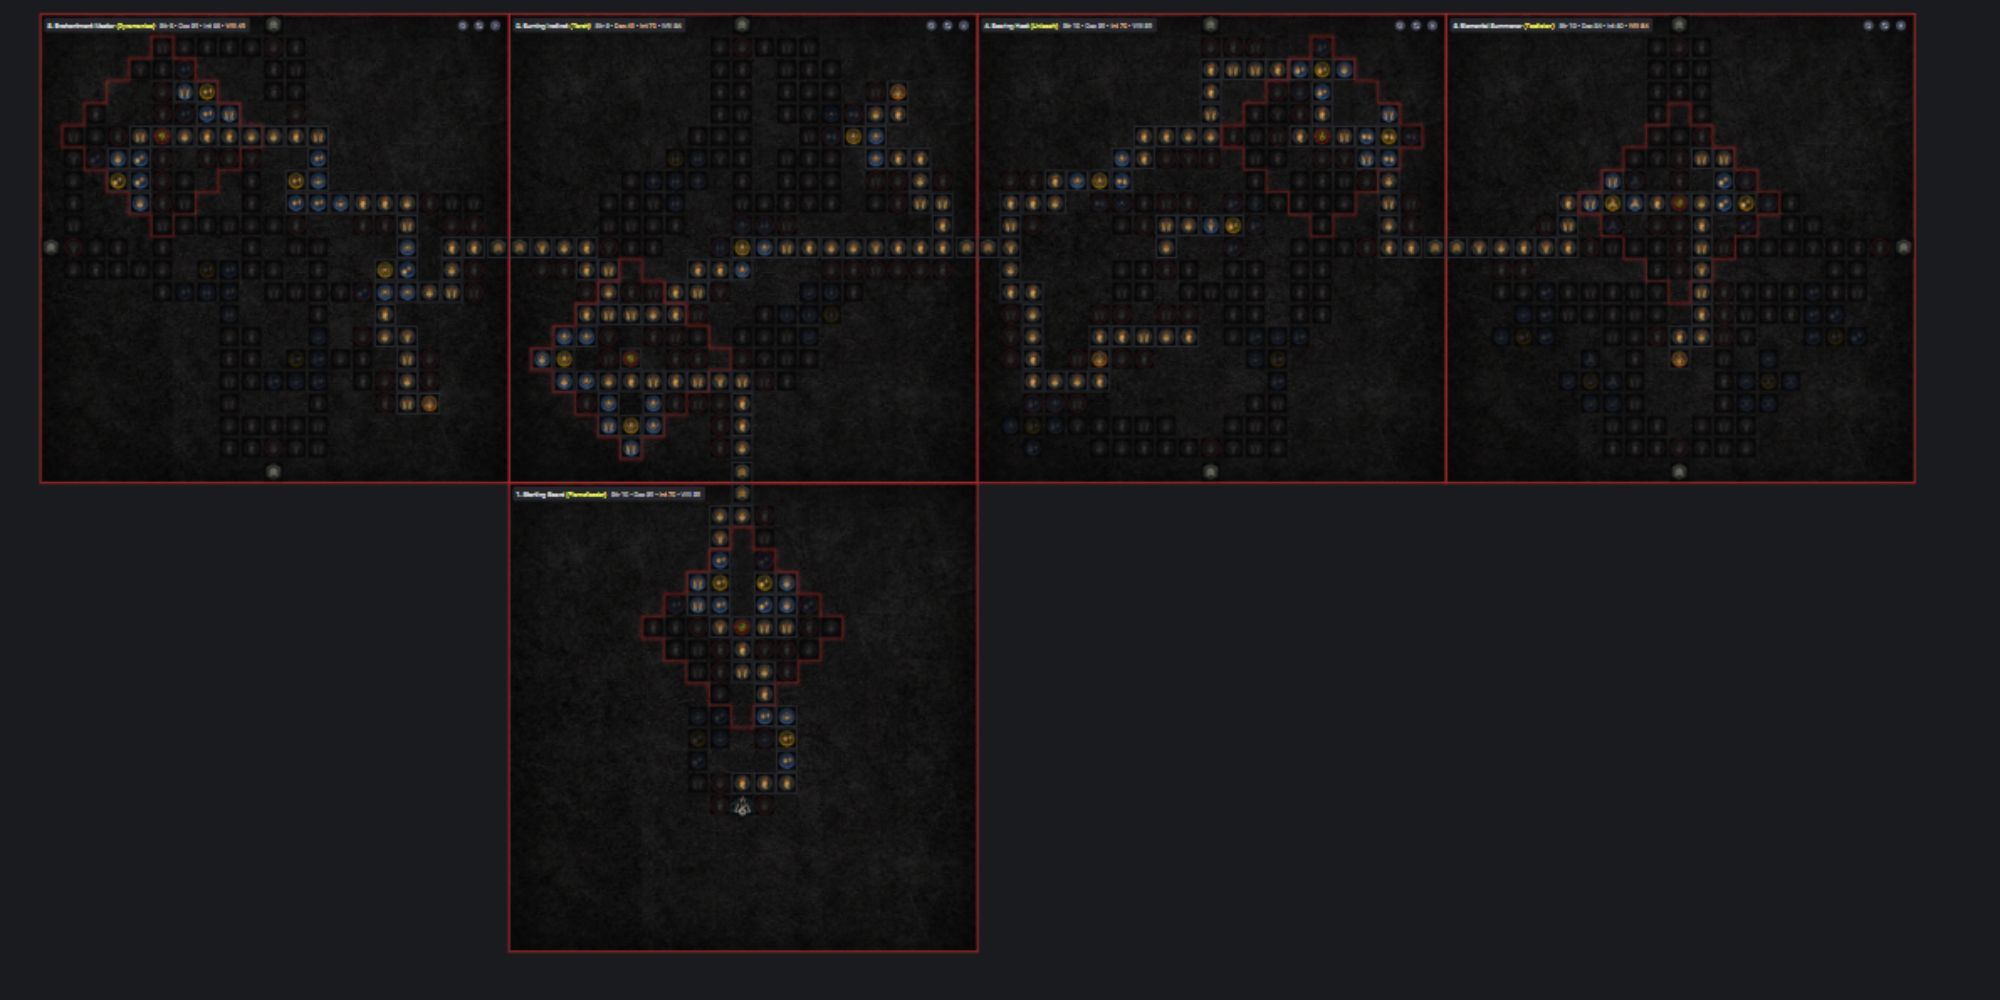 A screenshot of the planned Meteor Firewall Sorcerer build's Paragon boards